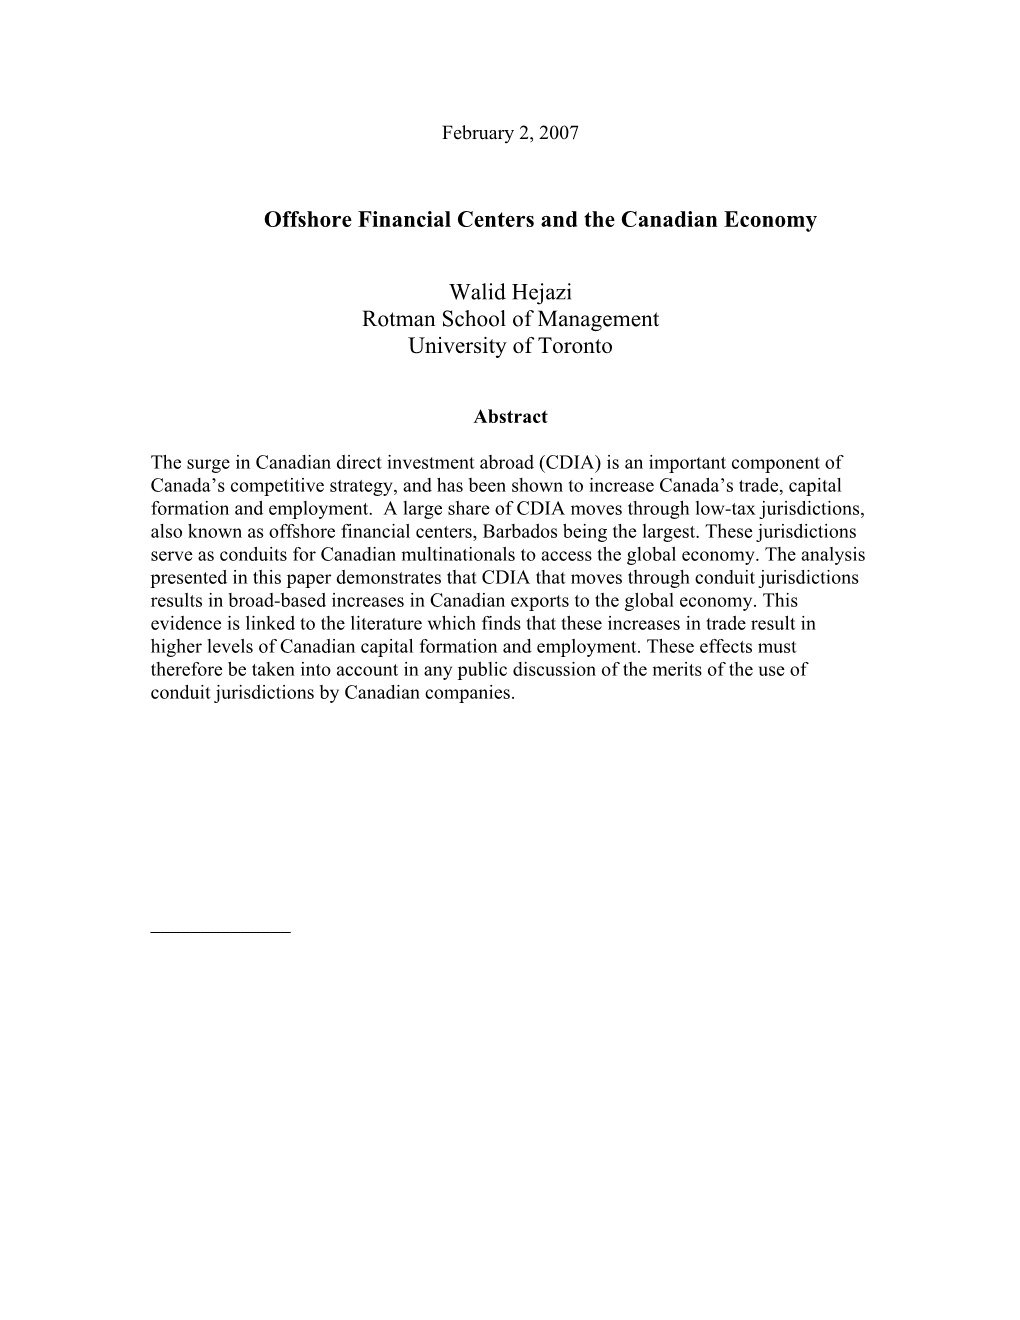 Offshore Financial Centers and the Canadian Economy